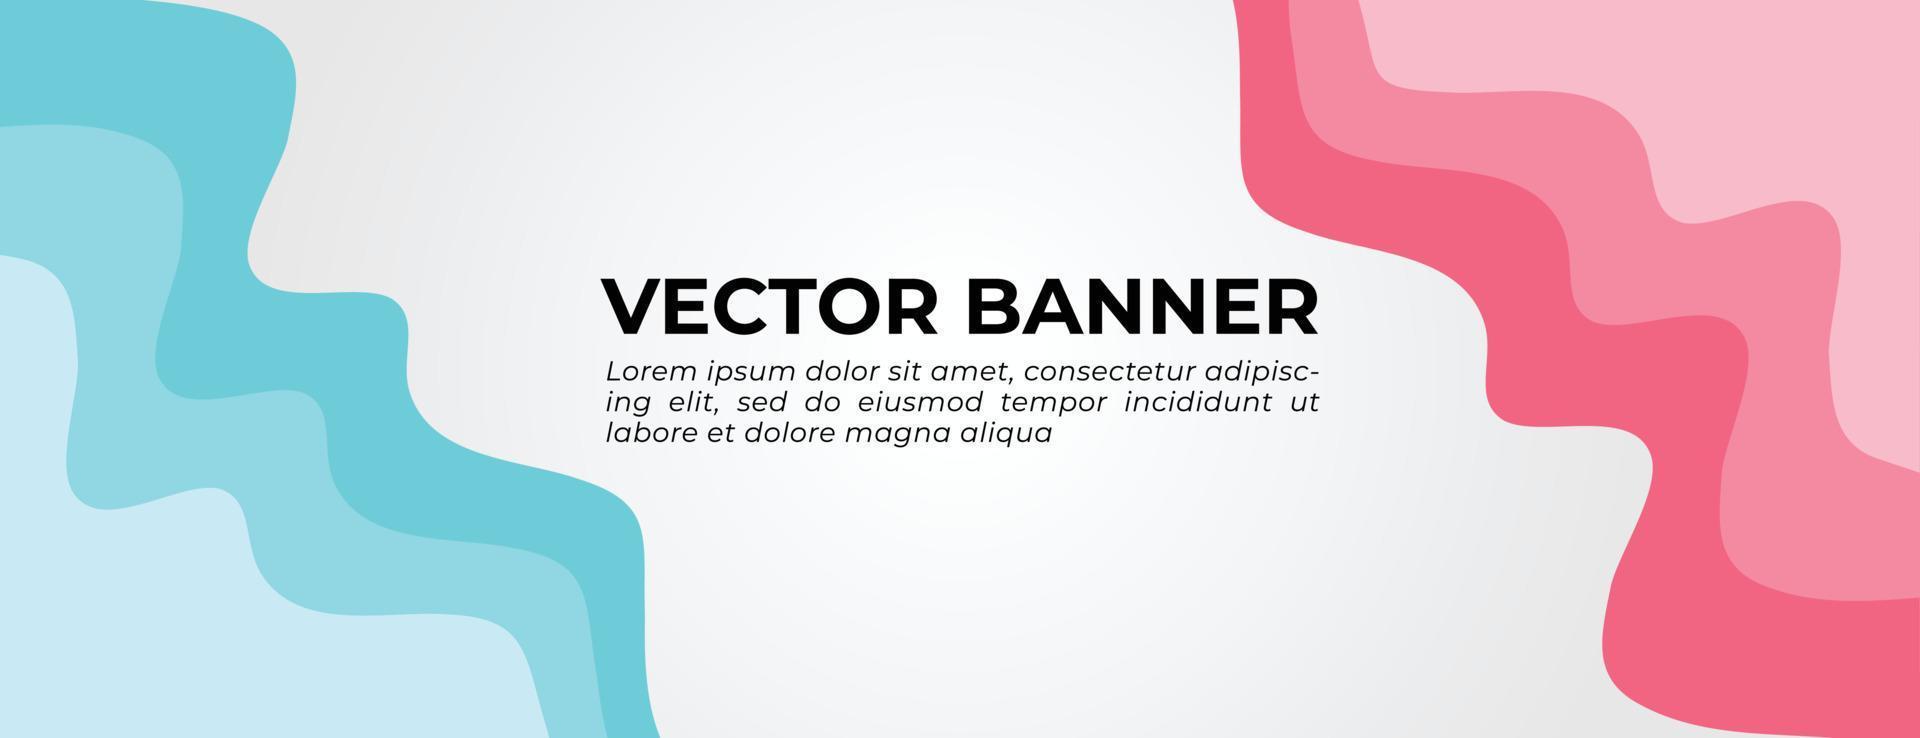 Blue and Pink Vector Banner with Abstract Waves Template Design